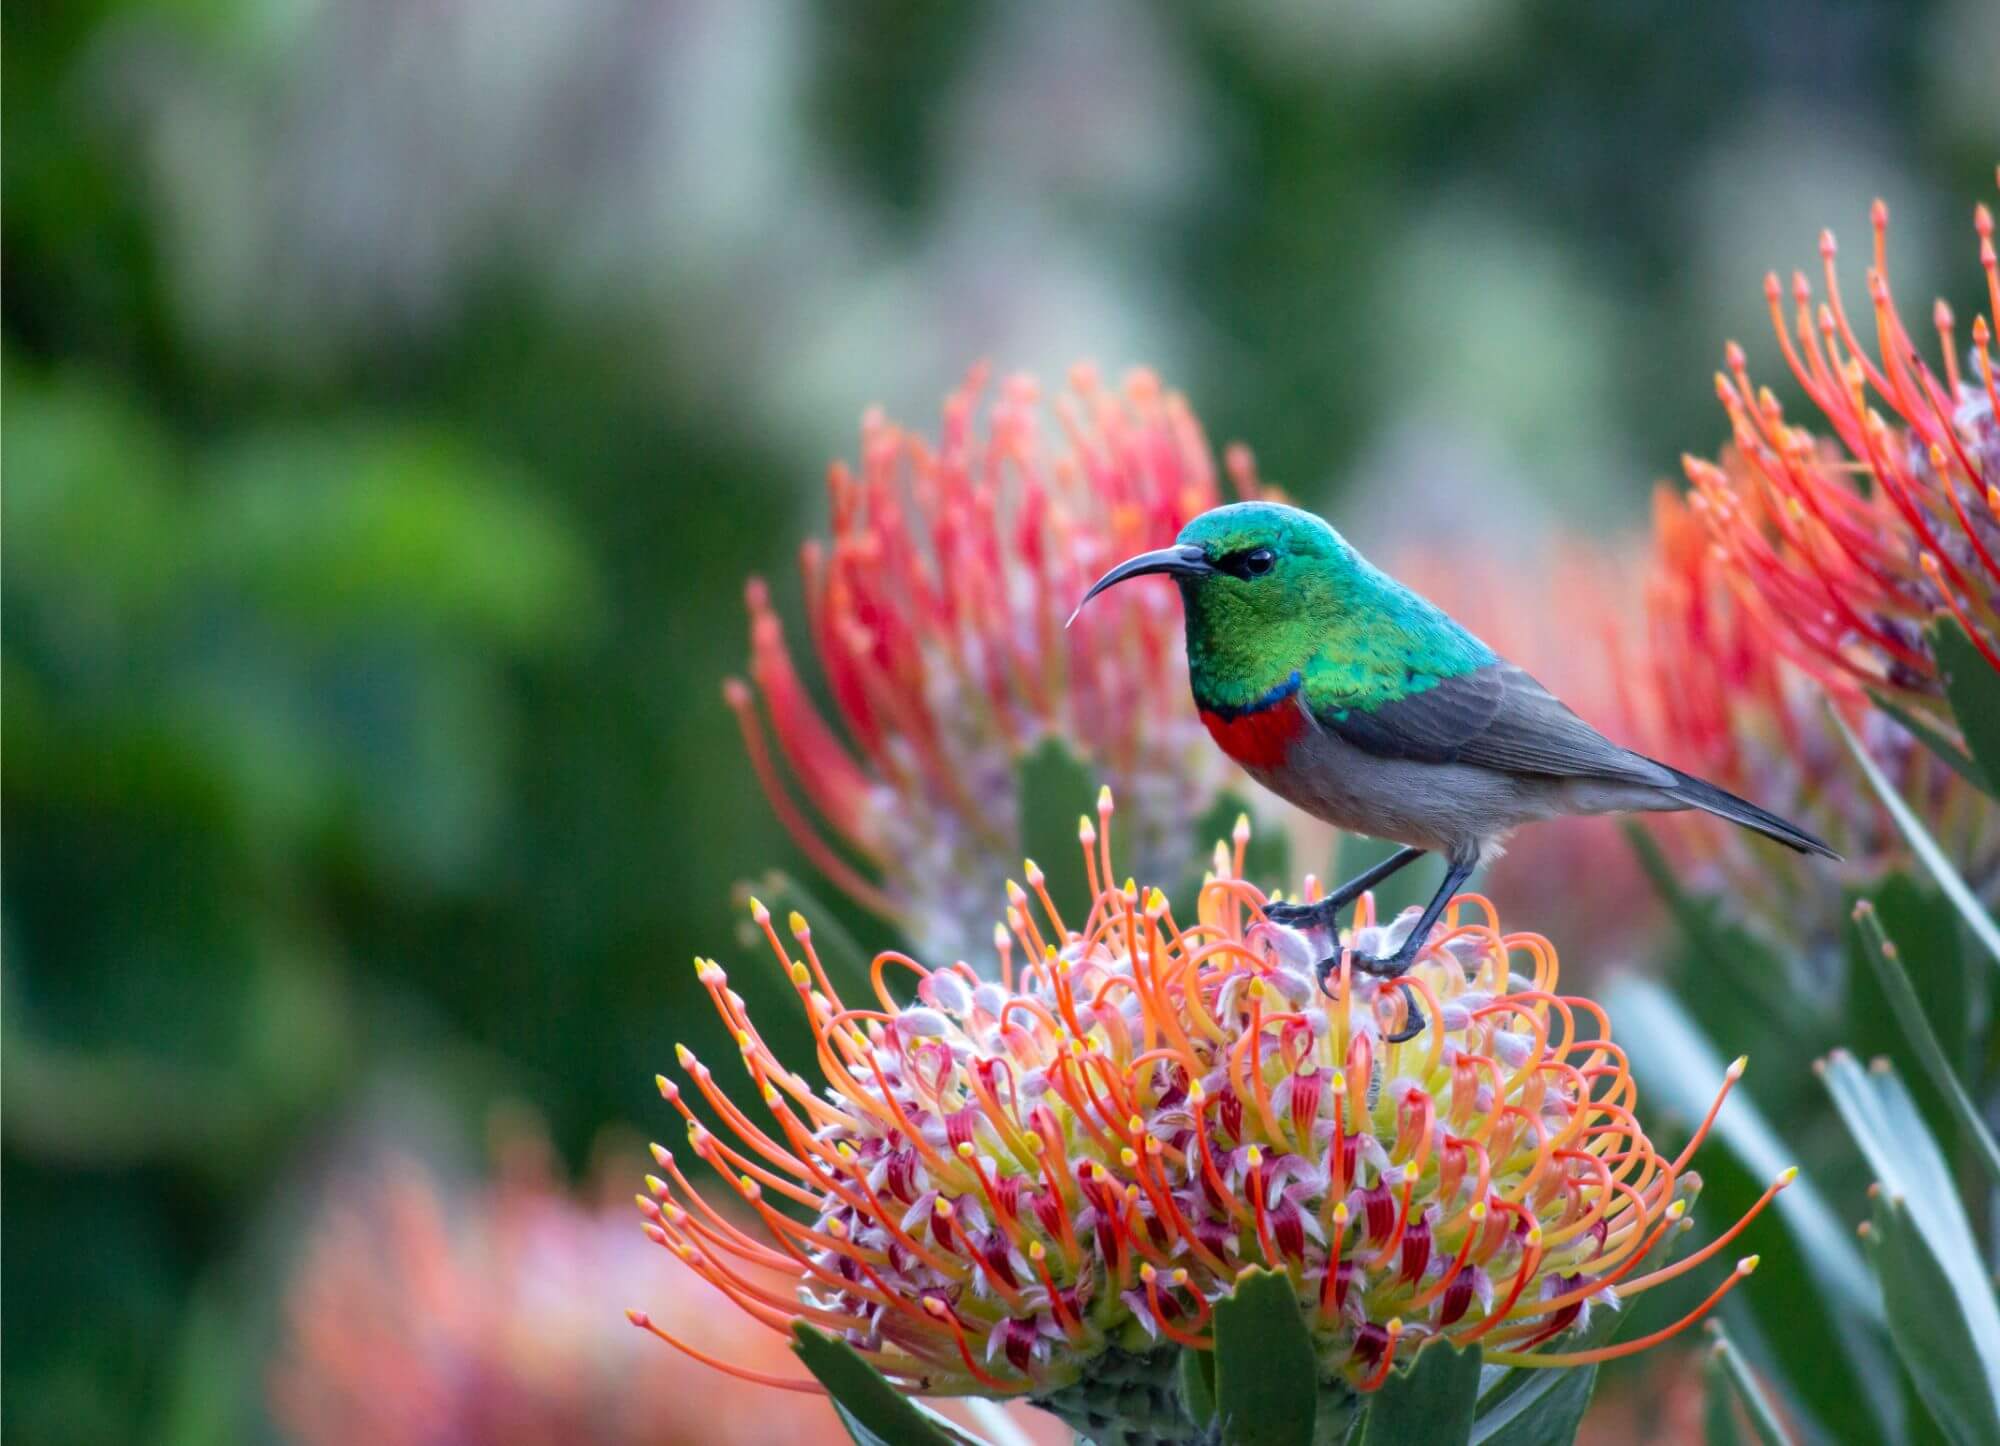 The South African National Biodiversity Institute’s awesome online resources make finding information about the living world around us a genuine pleasure. And if you’re a gardener, developer, or estate manager with a special interest in indigenous plants, it’s a treasure trove almost as rich as biodiversity itself.